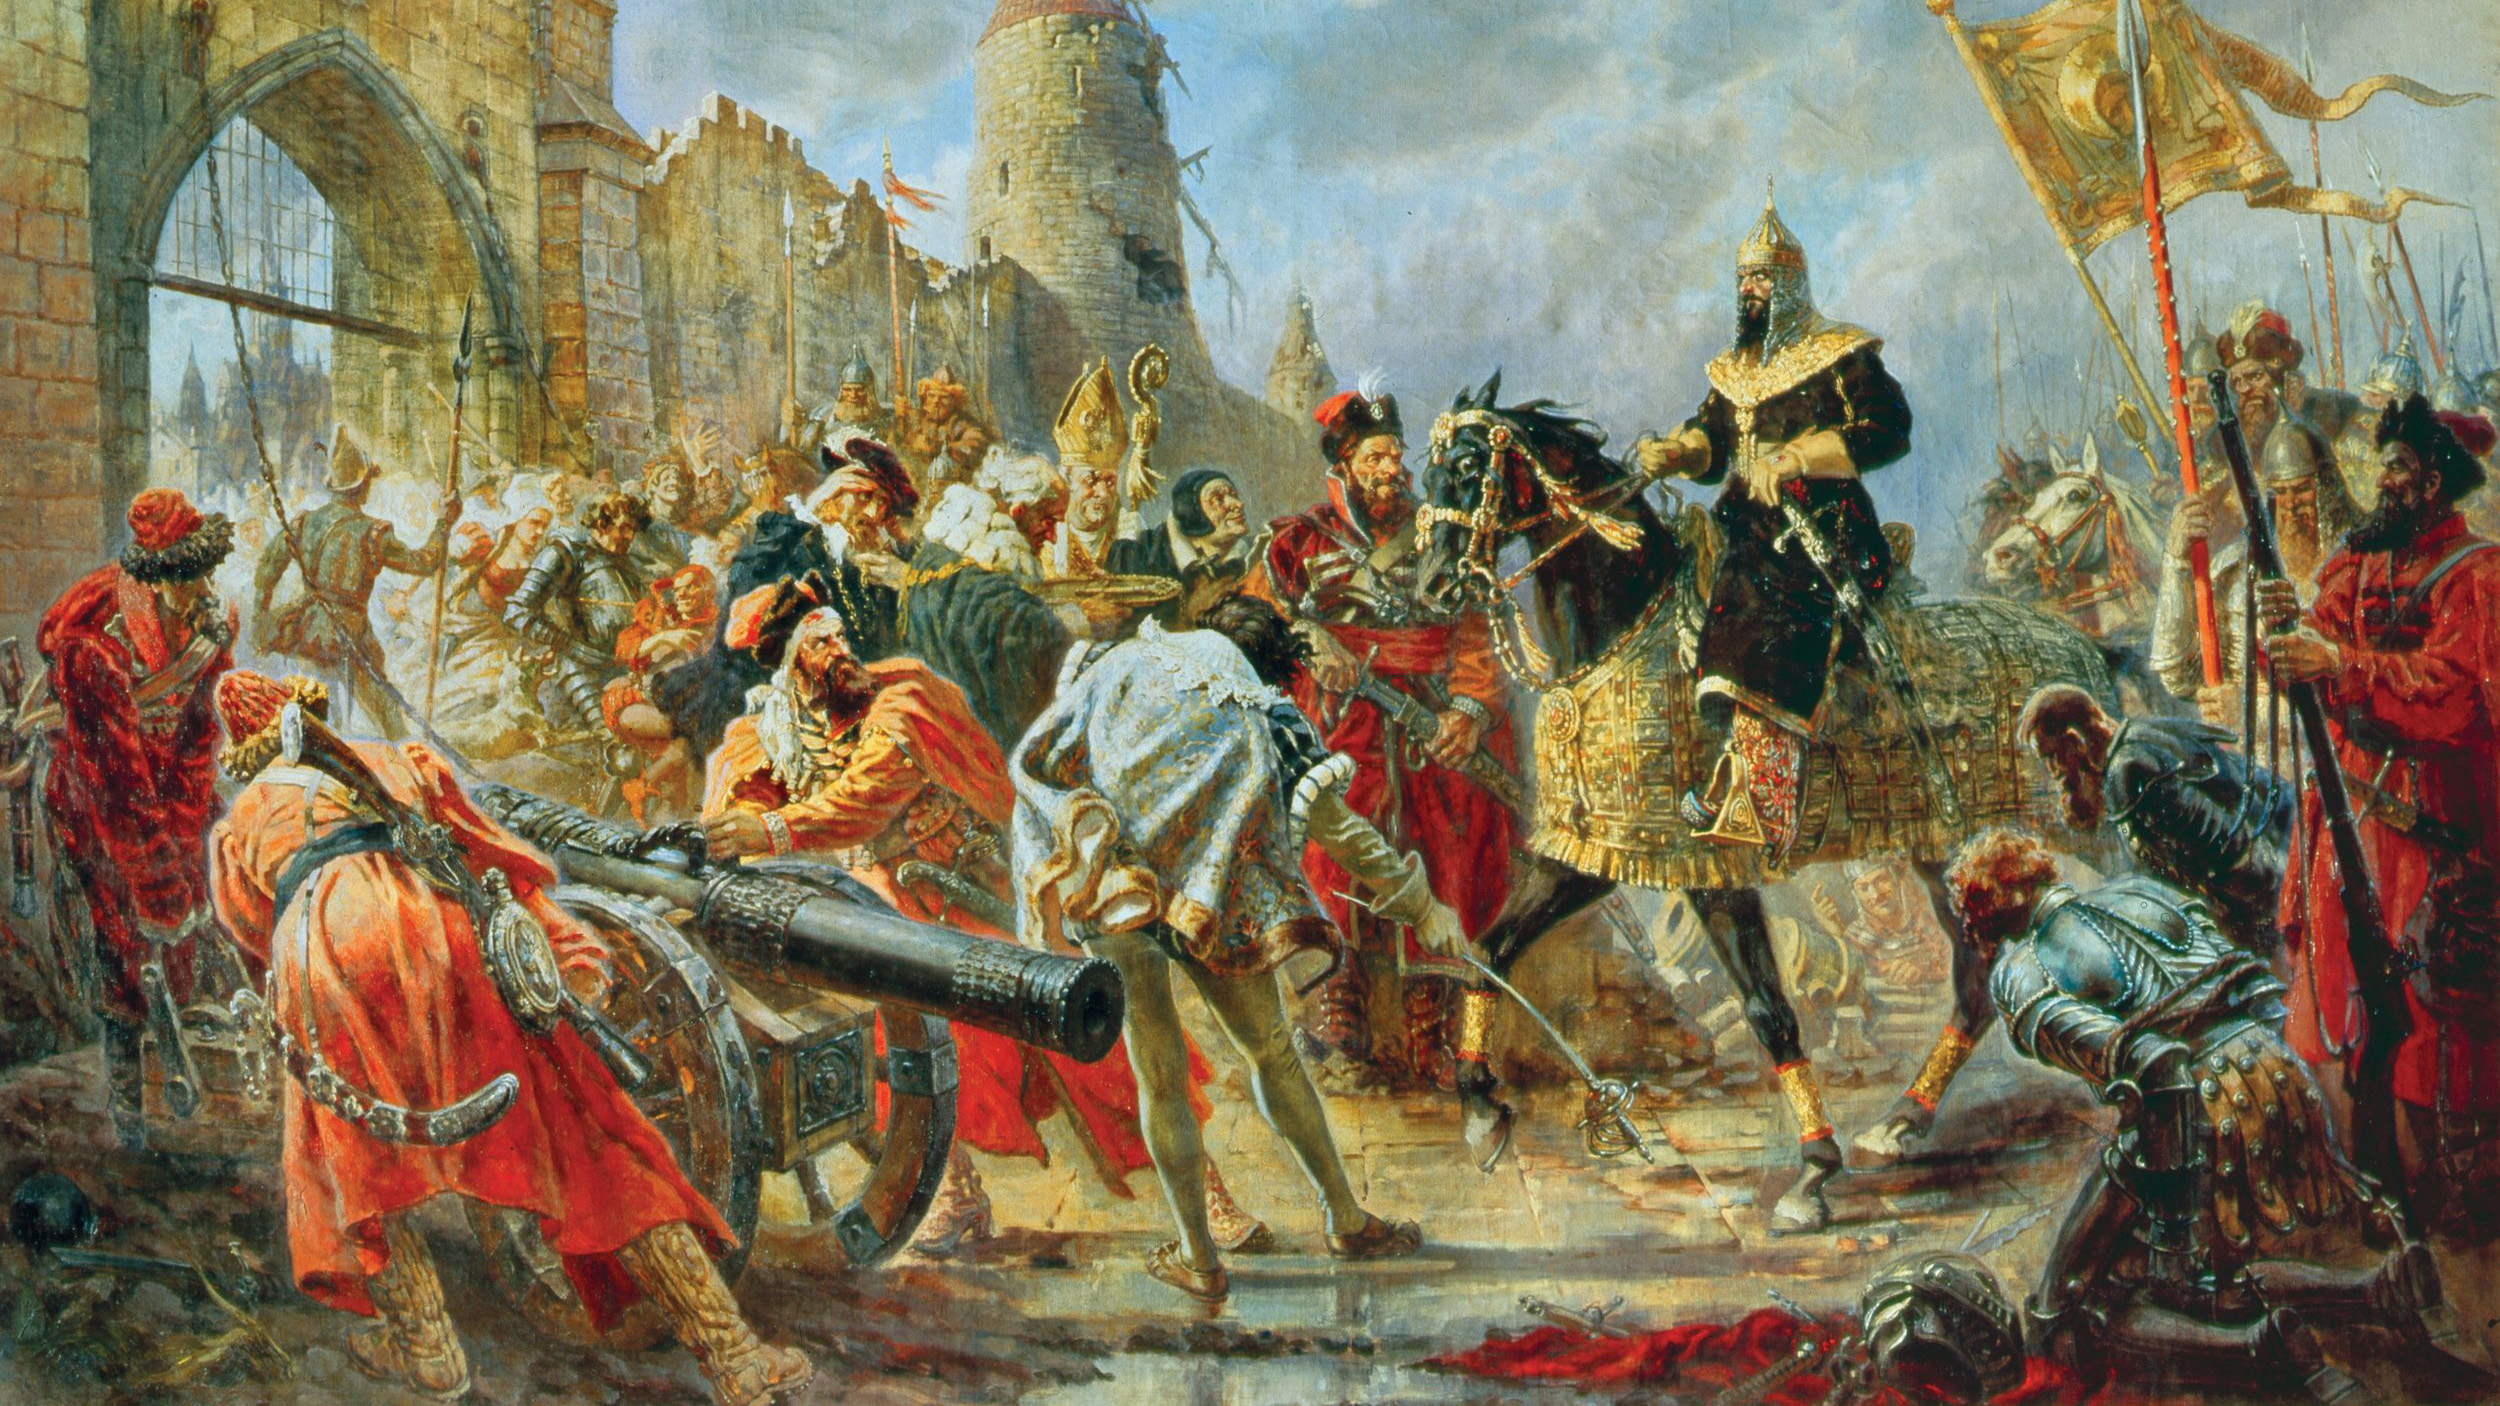 Russian Czar Ivan the Terrible, hand on sword, claims the Livonian fortress of Konhausen during his quarter-century-long invasion of the neighboring country.